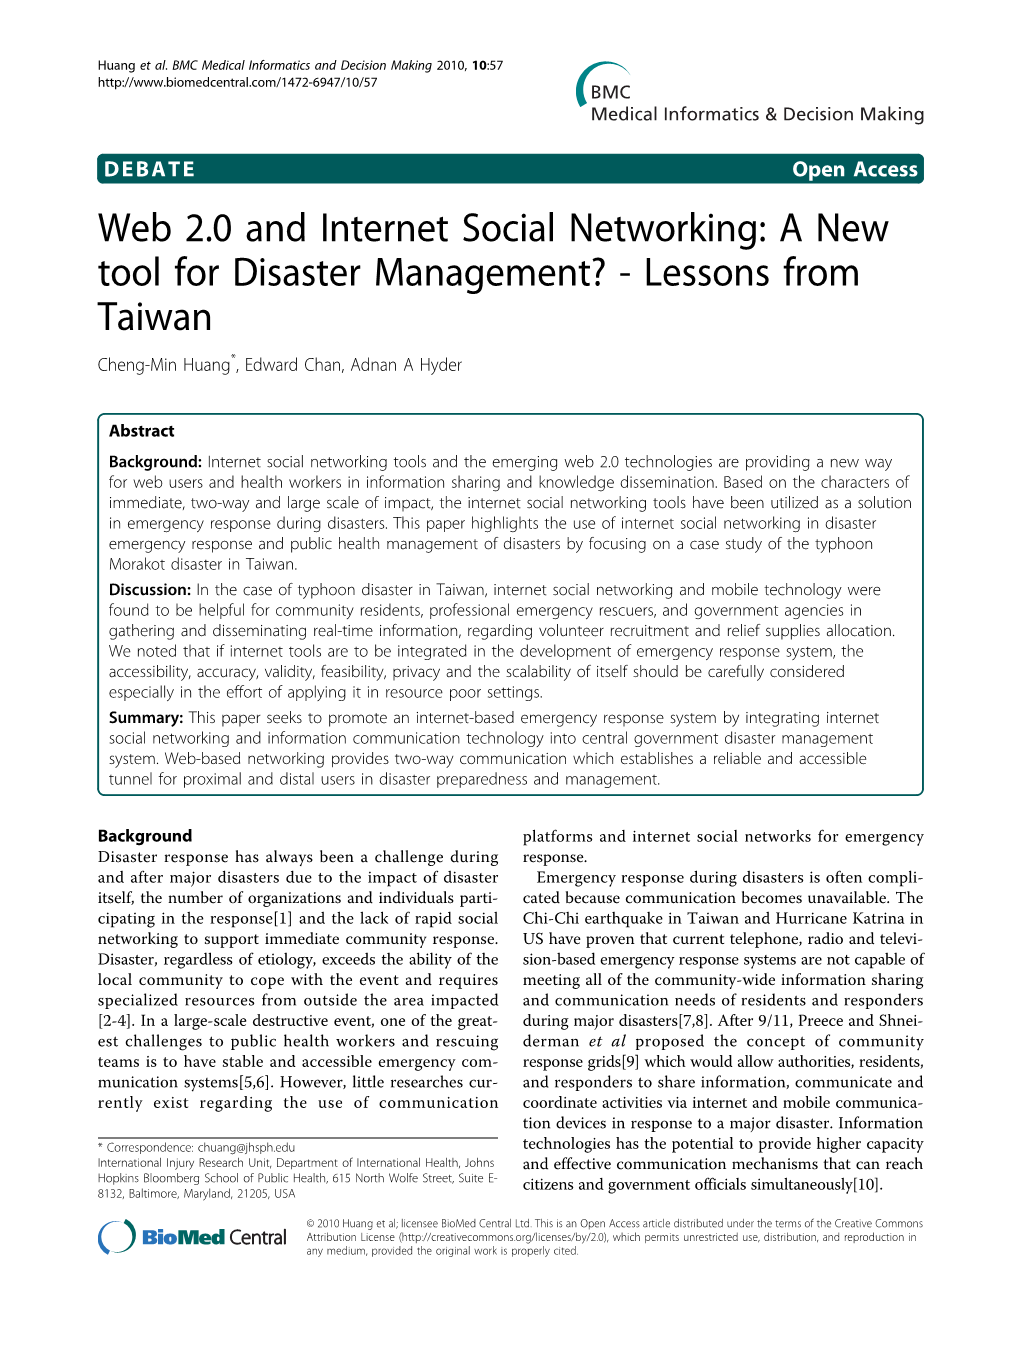 Web 2.0 and Internet Social Networking: a New Tool for Disaster Management? - Lessons from Taiwan Cheng-Min Huang*, Edward Chan, Adnan a Hyder